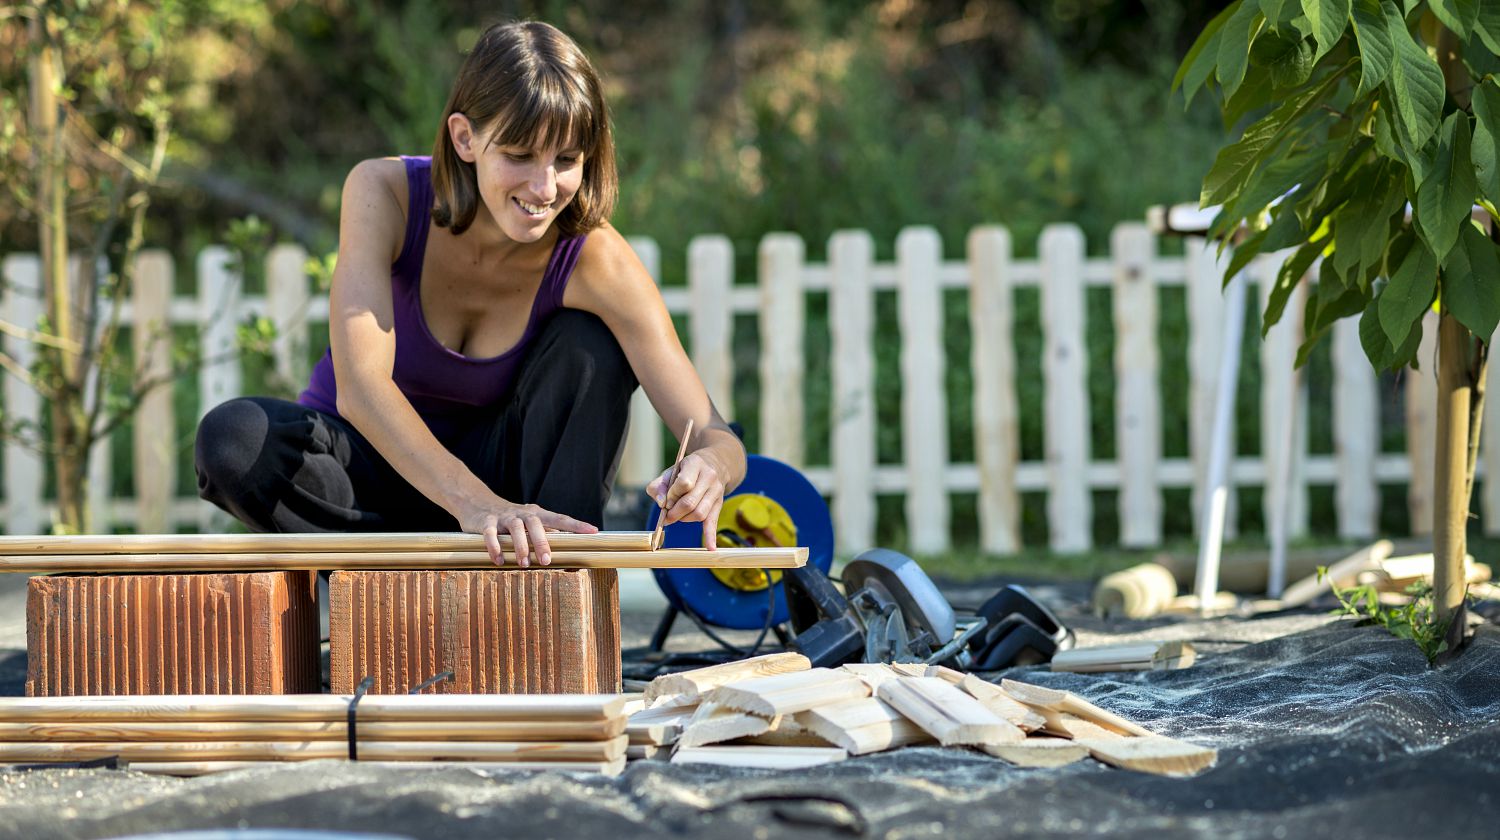 Smiling young woman marking with a pencil where to cut a wooden plank for a backyard fence | Backyard Projects To Enjoy Time Outdoors This Summer | Featured